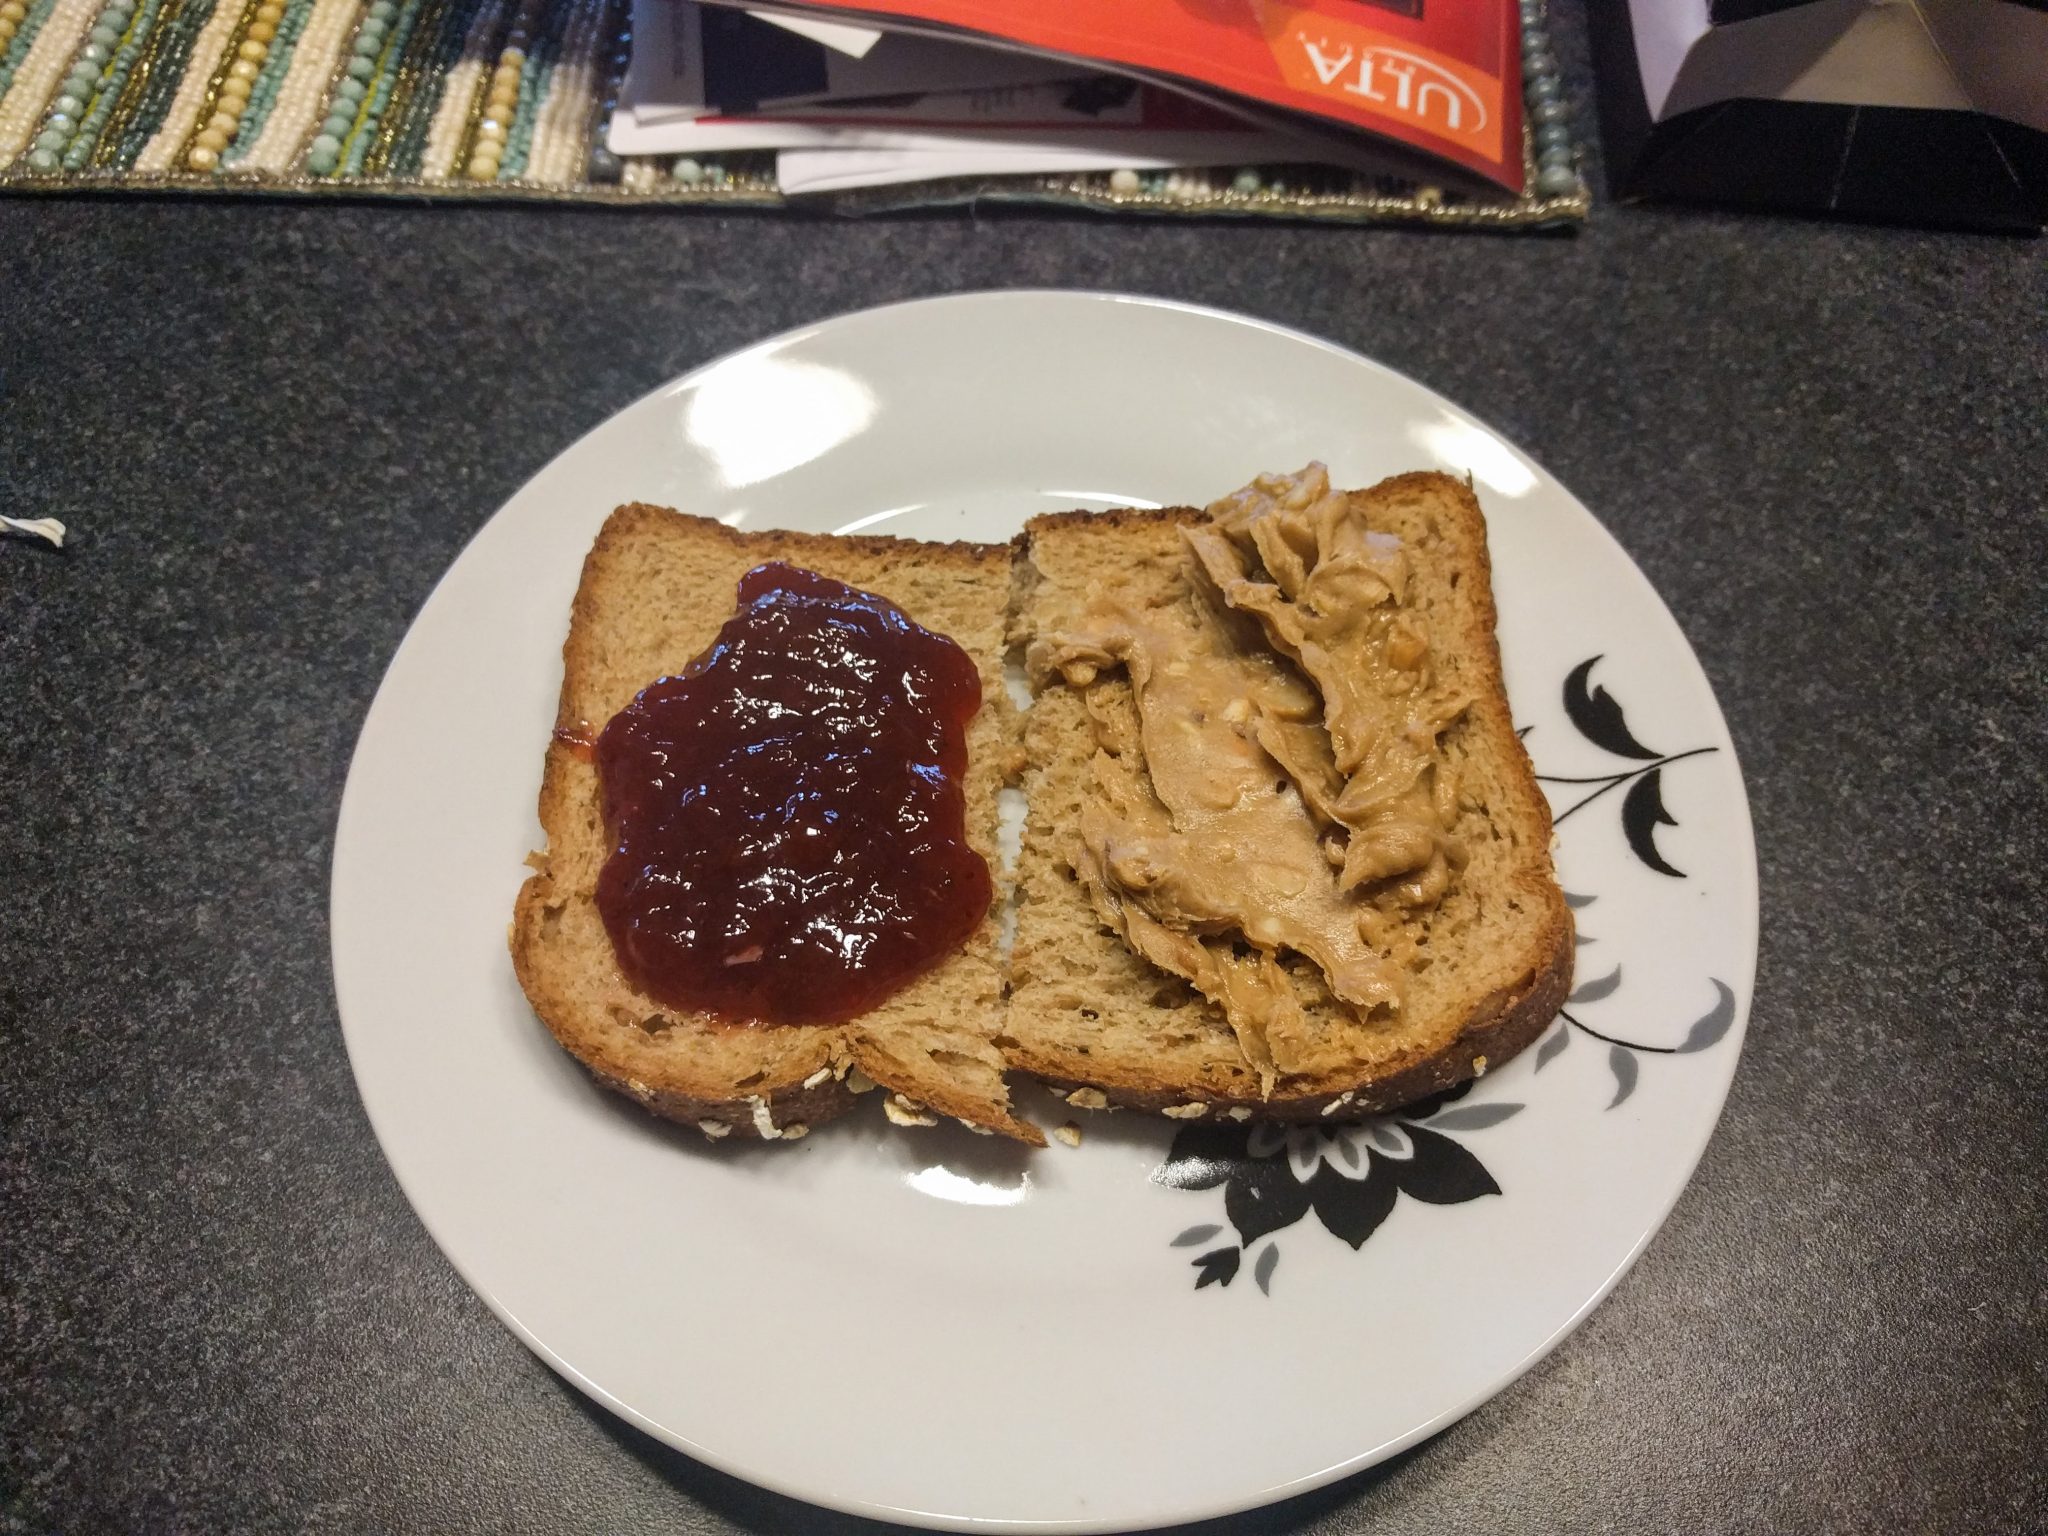 Peanut Butter and Jelly Sandwich